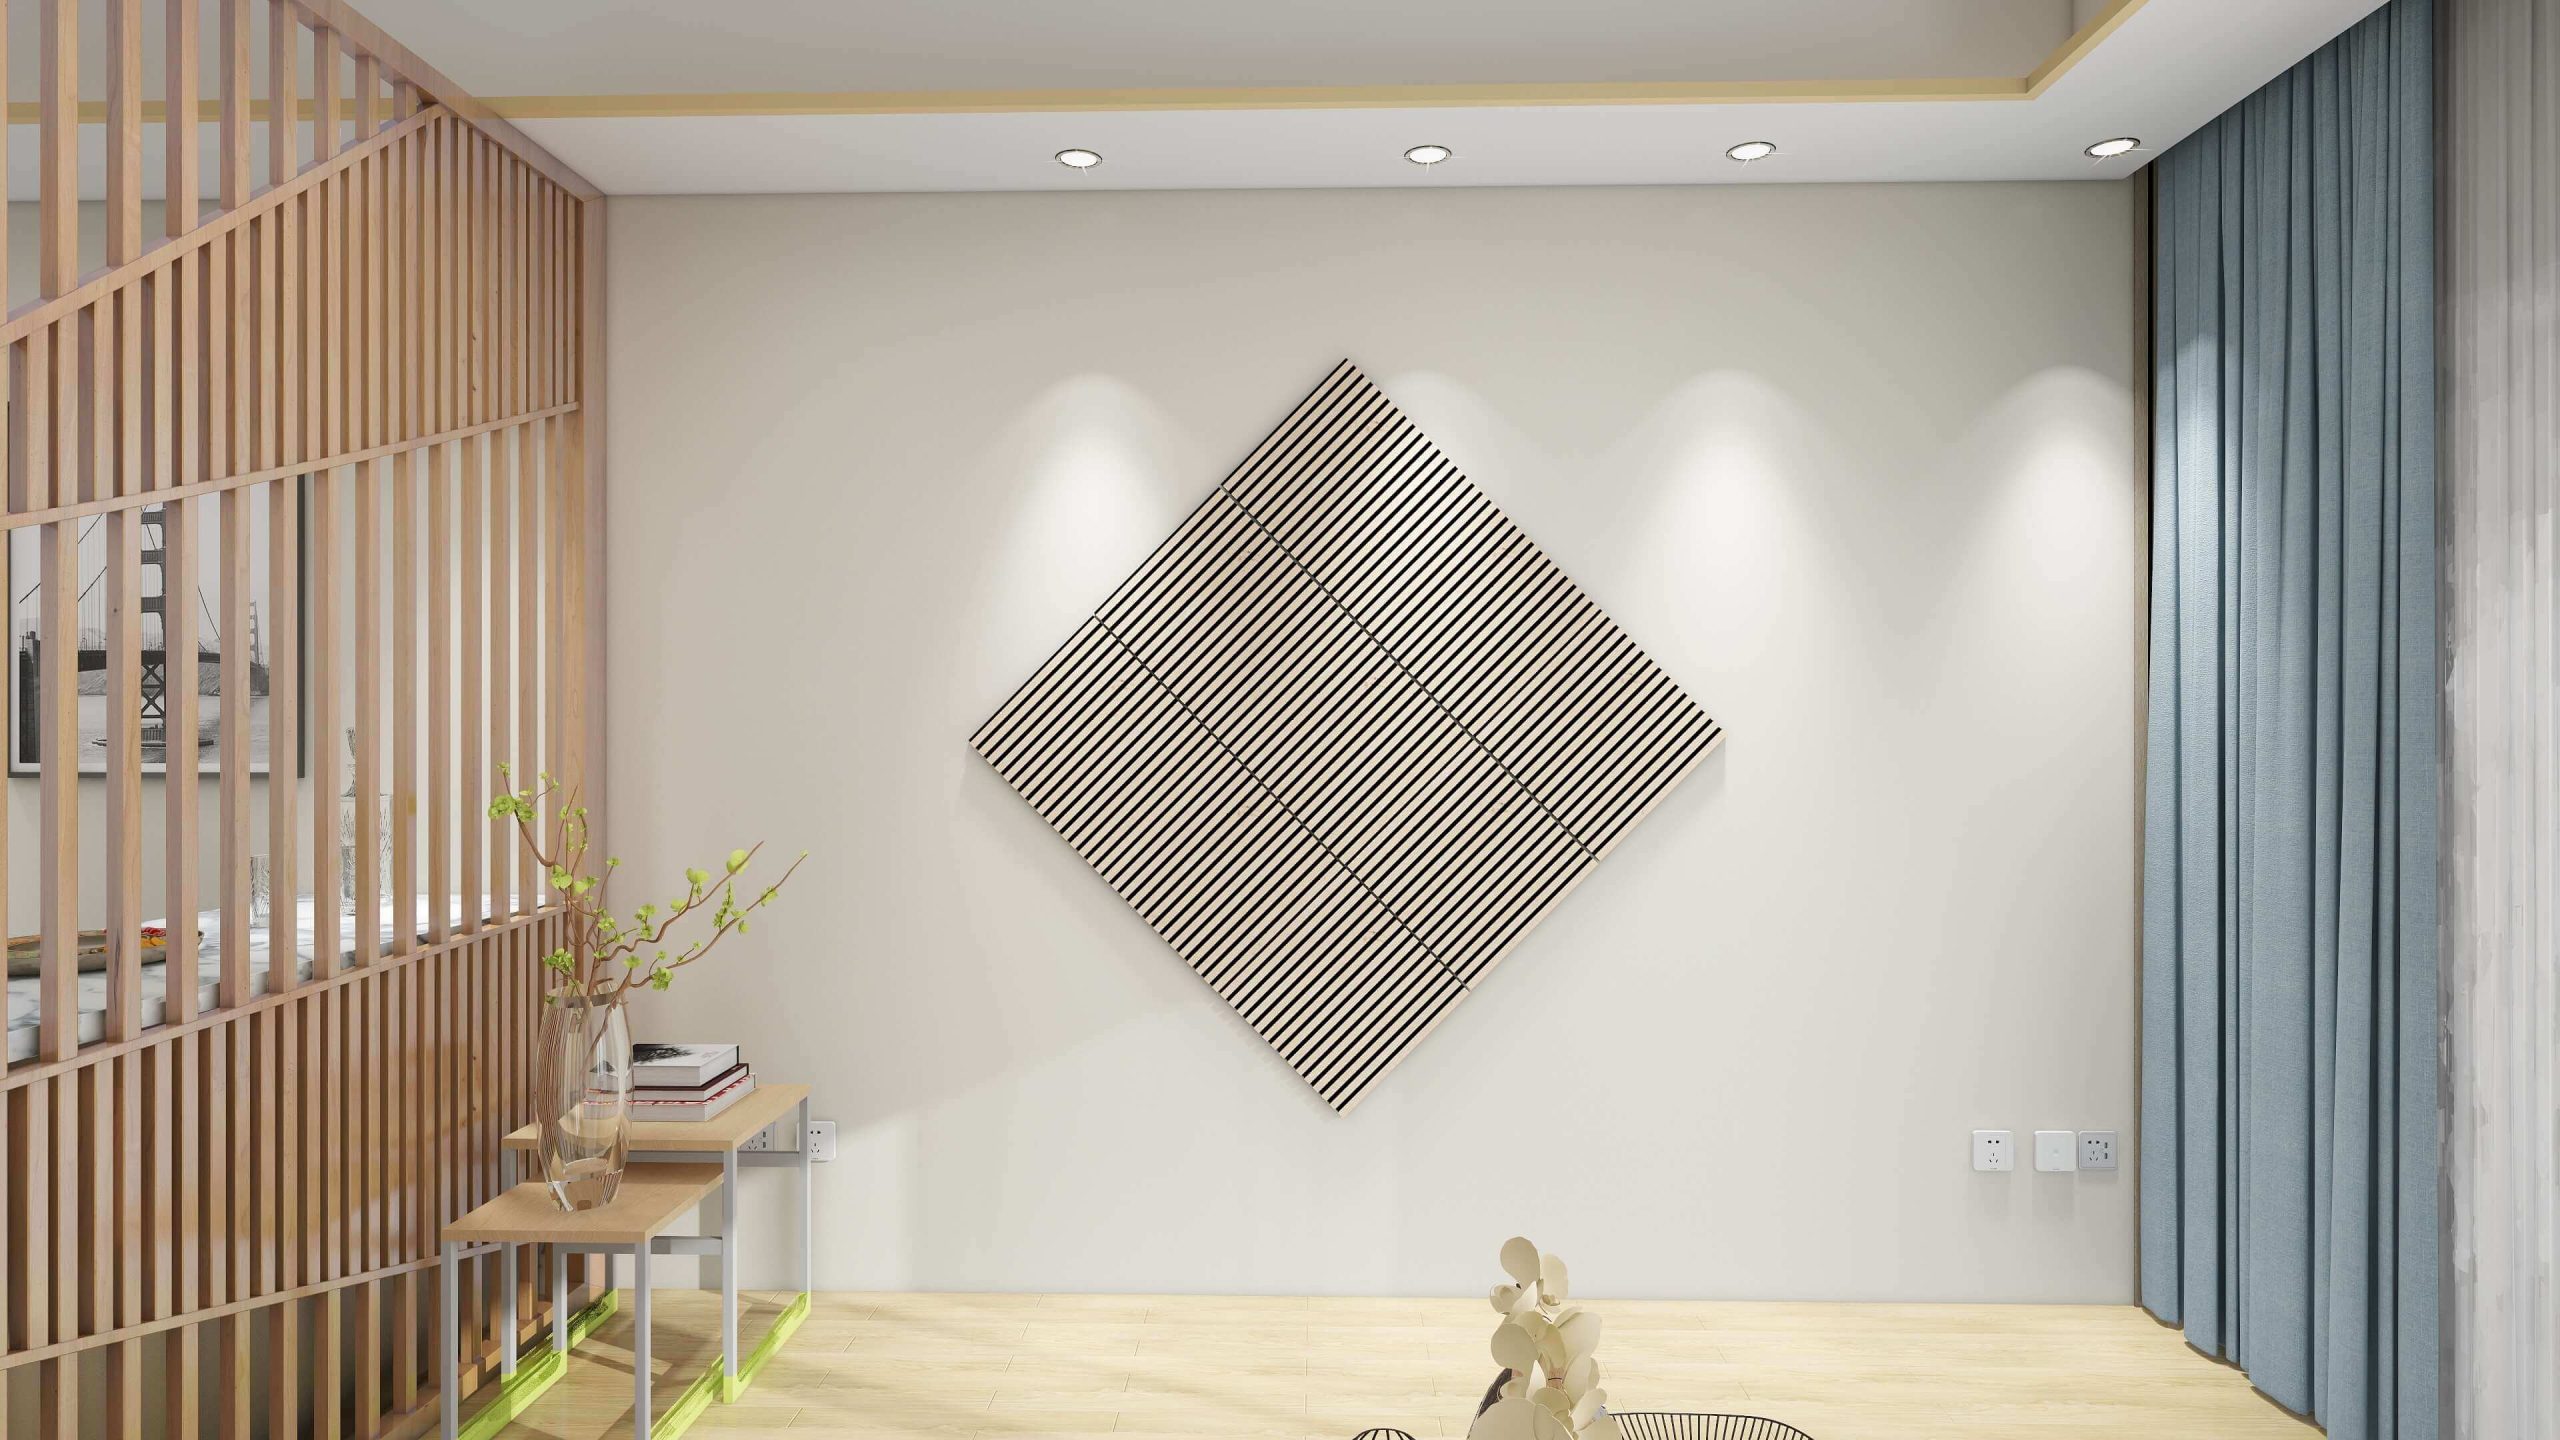 Intco Decor's MDF Acoustic Panels-Top-Selling Sound Solutions